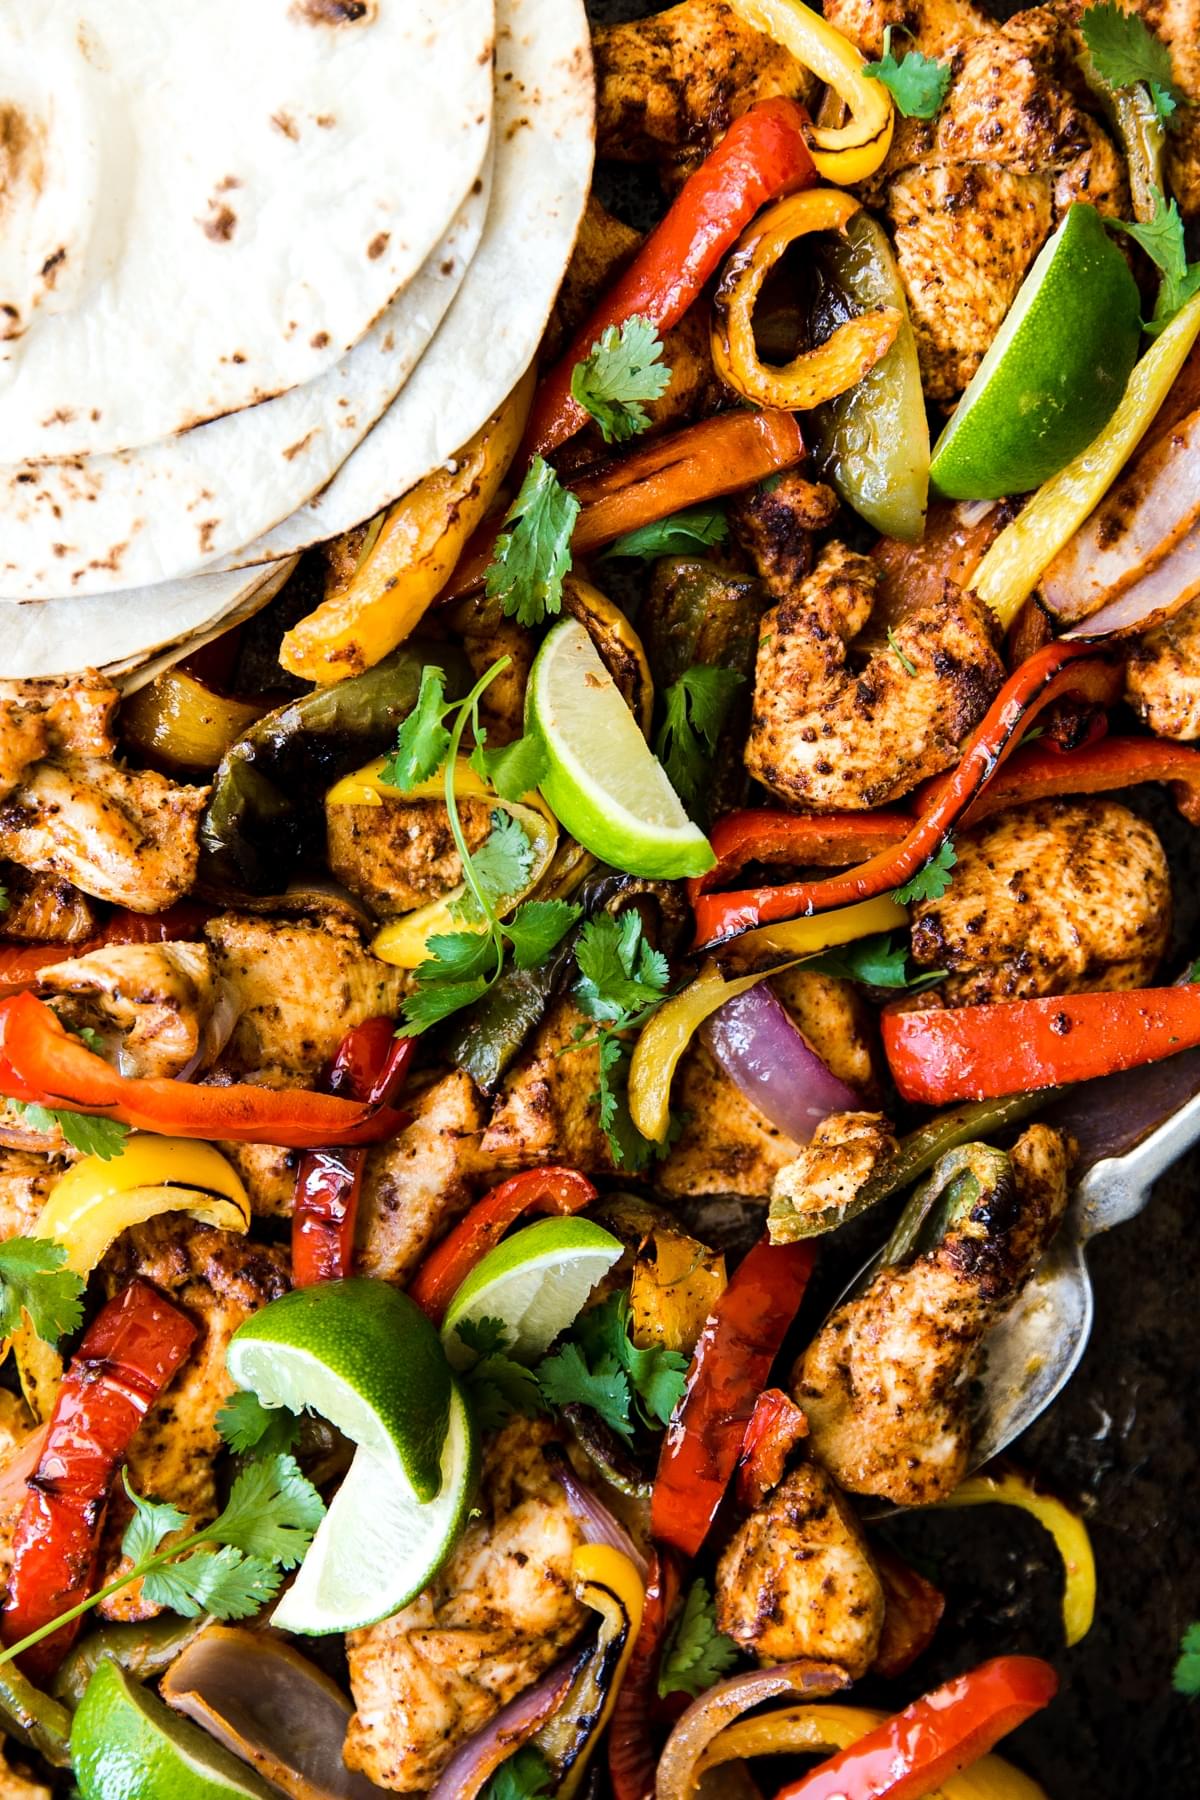 Chicken Fajitas on a sheet pan with onions, bell peppers, tortillas and a marinade.